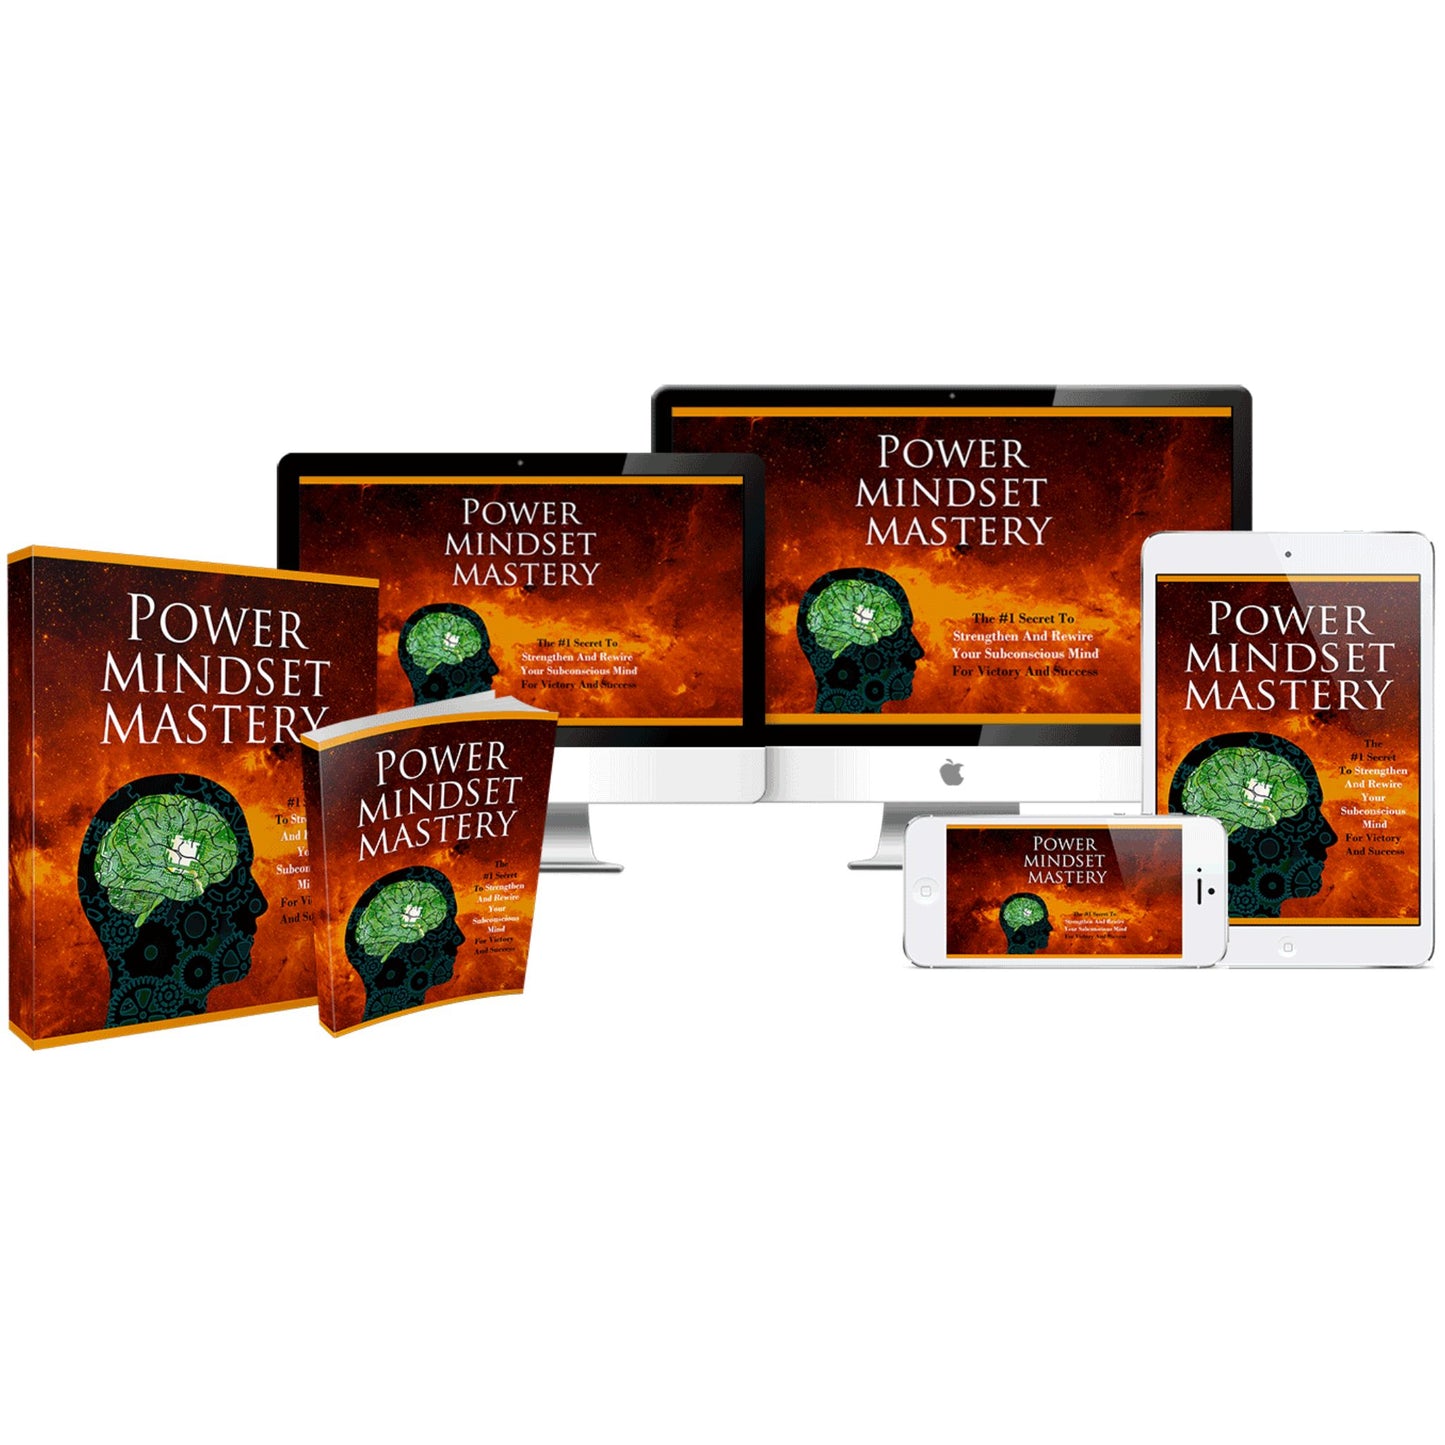 Power Mindset Mastery Kit - Be successful in Business and in relationships